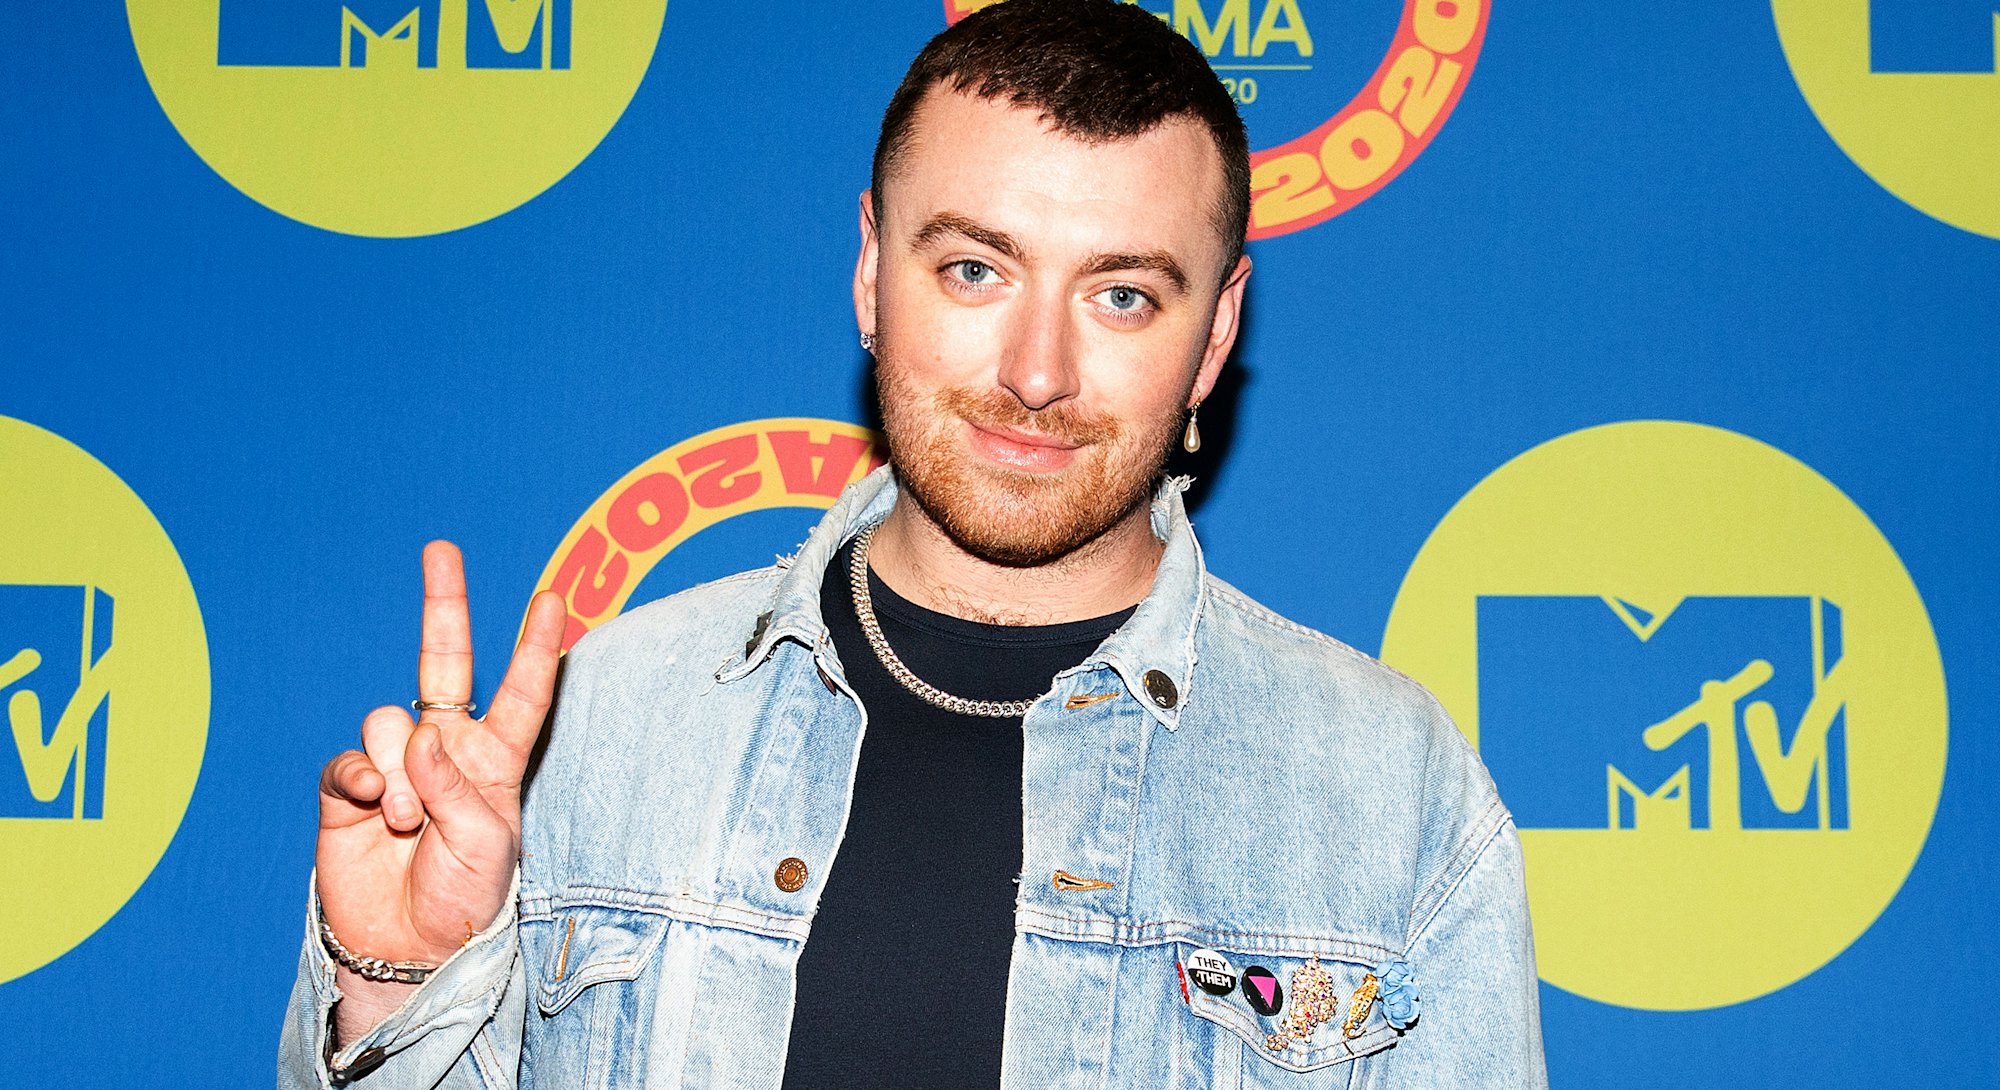 LONDON, ENGLAND - NOVEMBER 03: In this image released on November 08, Sam Smith poses at the MTV EMA...